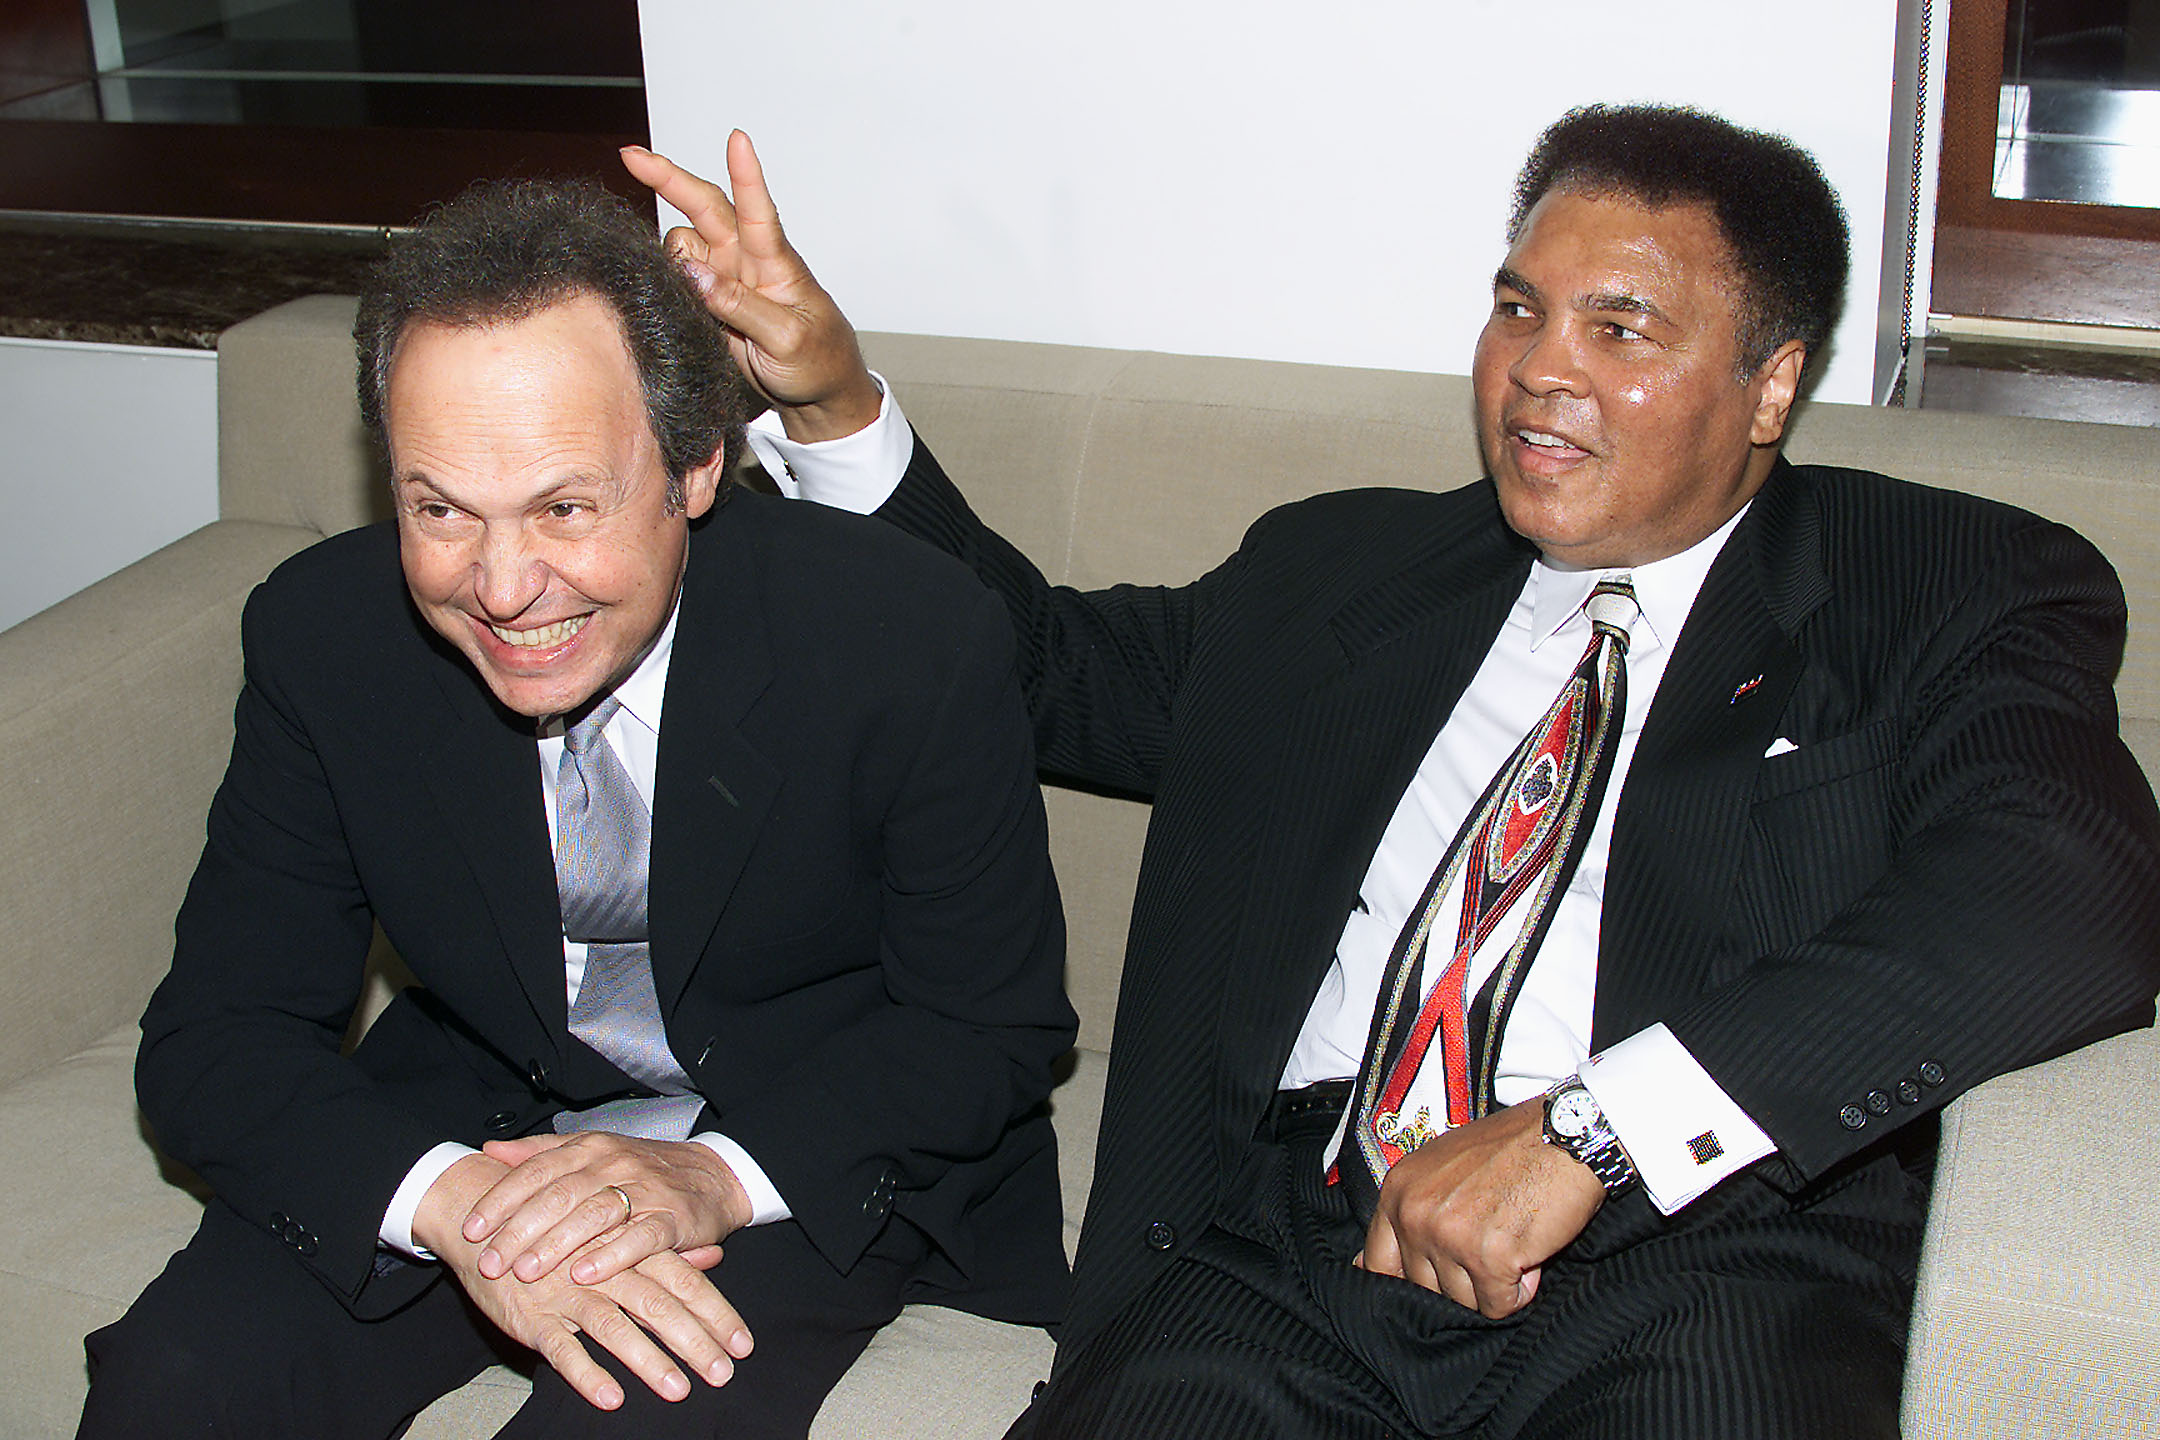 PHOTO: Billy Crystal & Muhammad Ali at Audemars Piguet's Time To Give Celebrity Watch Auction For Charity held at Christie's Auction House in New York on Oct. 23, 2000. 